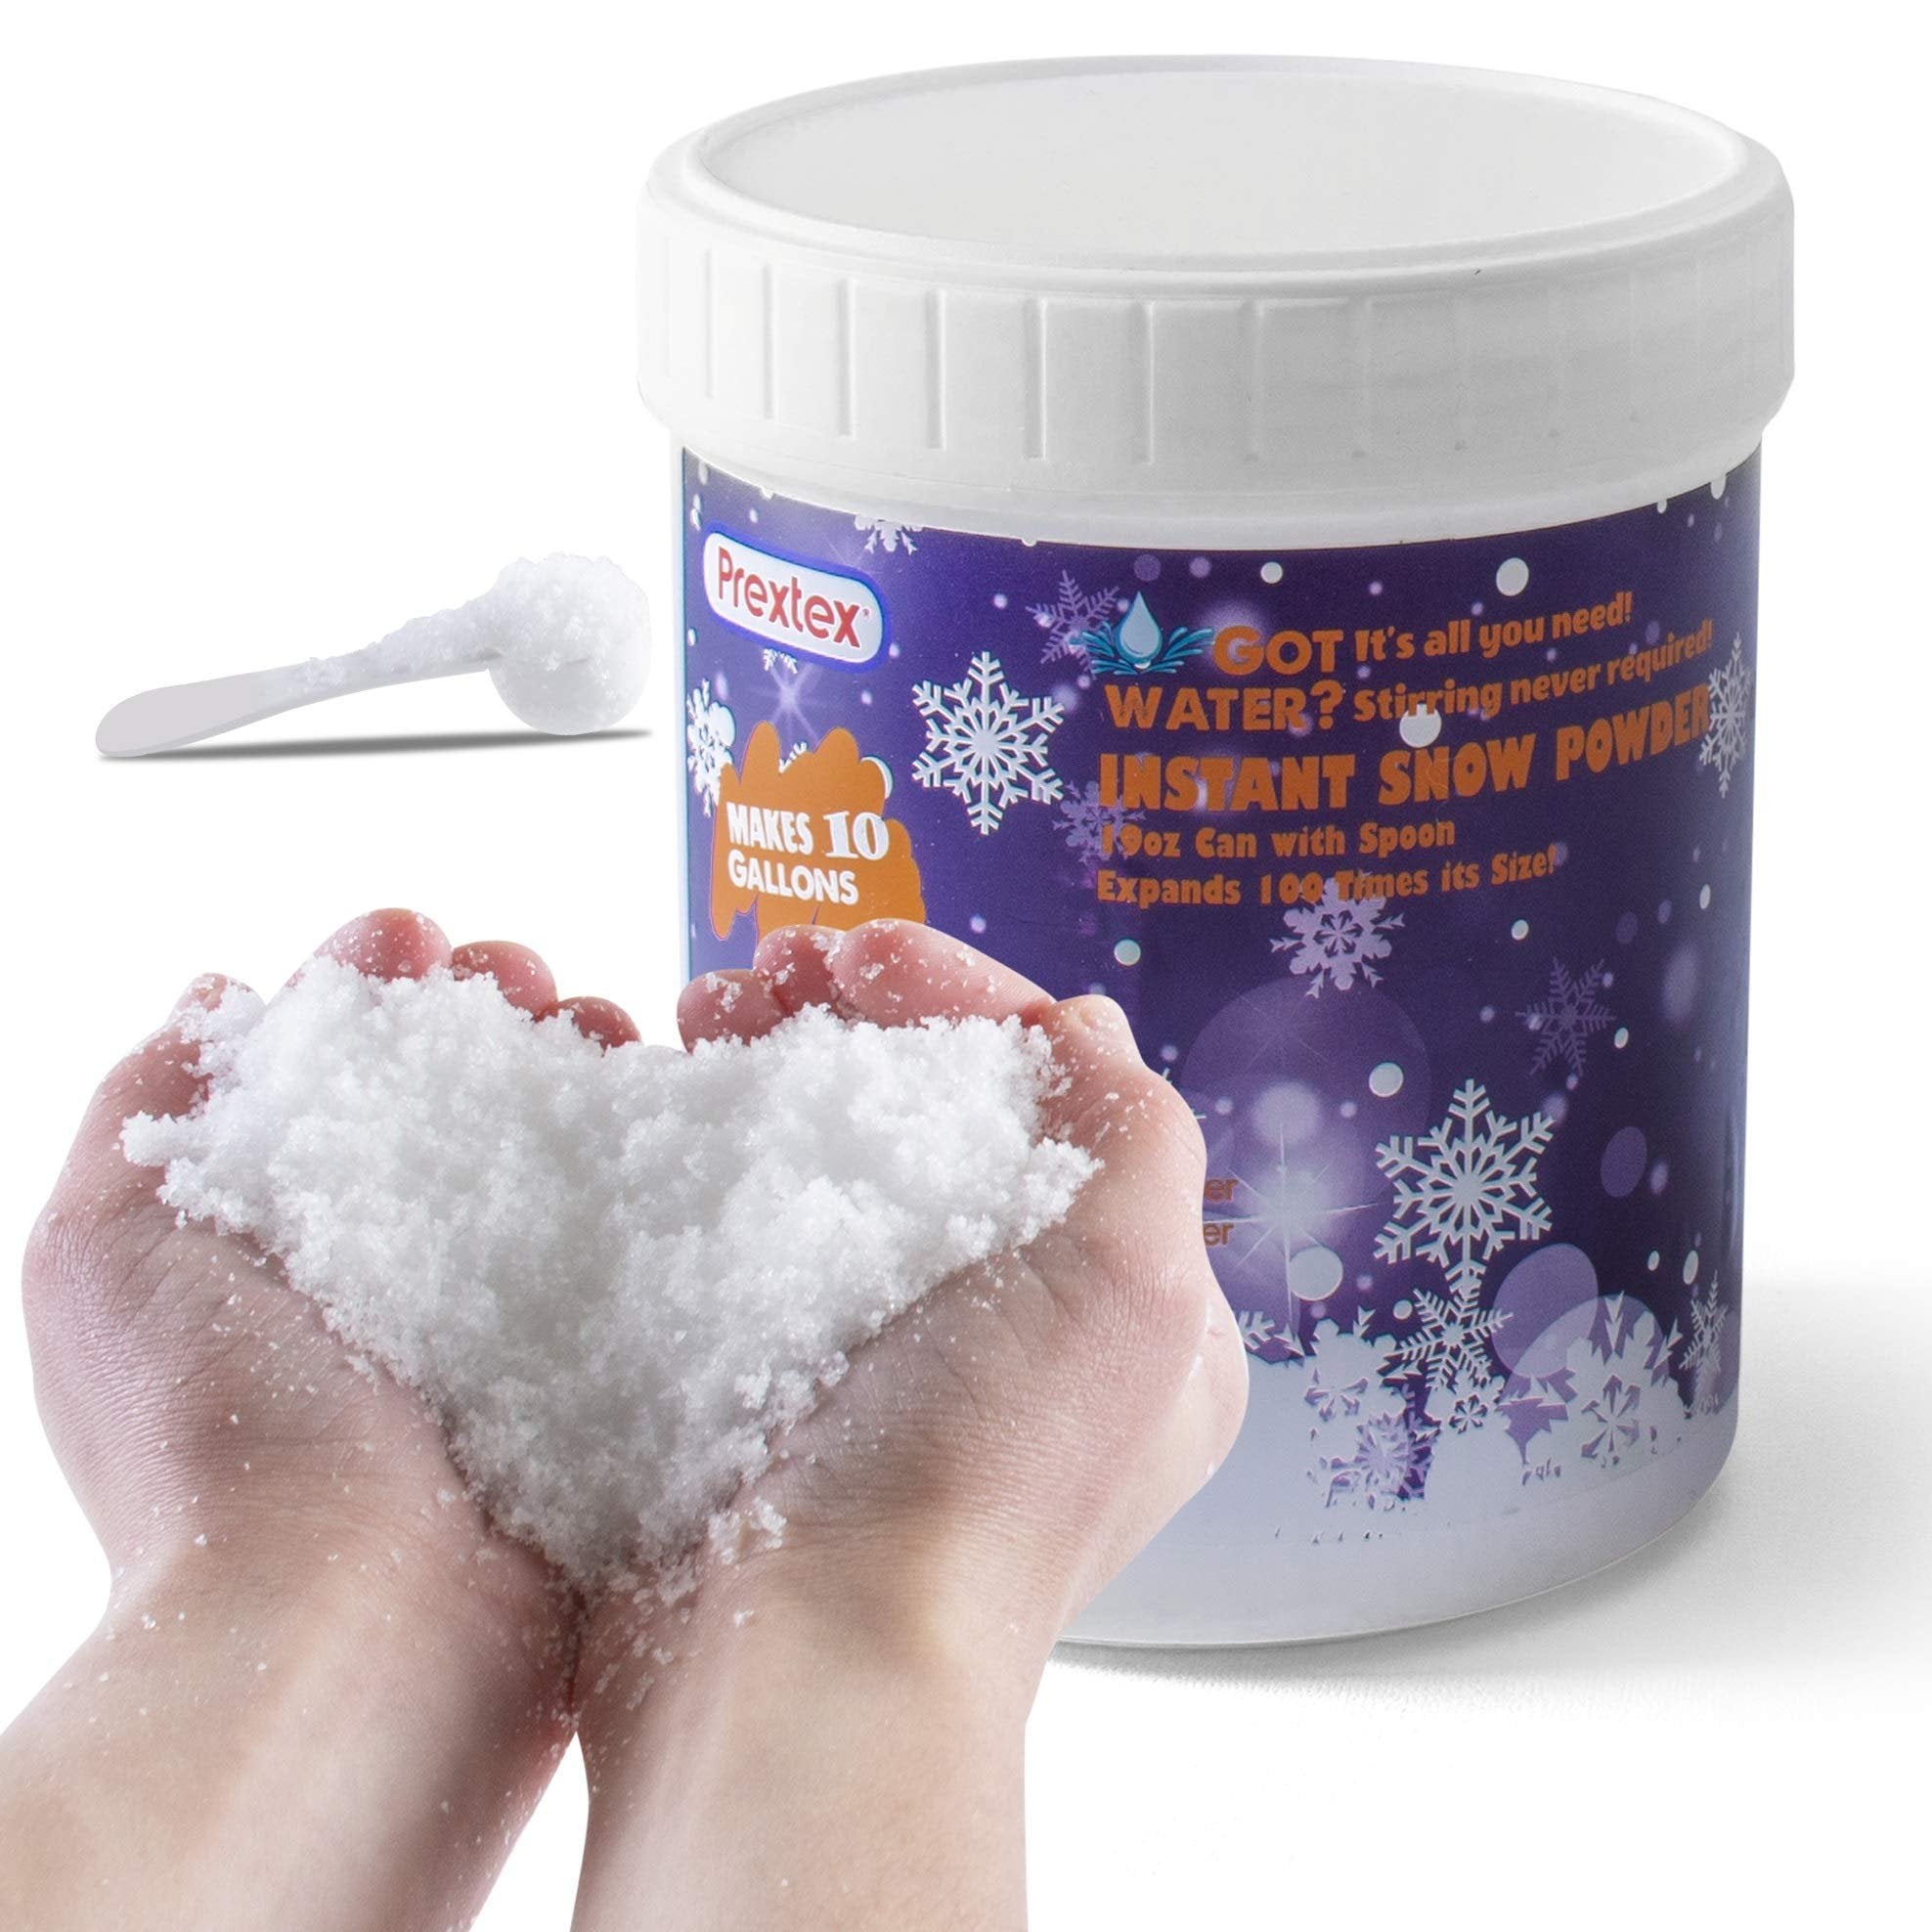 Instant Snow Powder - Makes 10 Gallons of Fake Snow - Perfect for Winter Decoration, Village Displays, Holiday and Winter Crafts and Artificial Snow Play